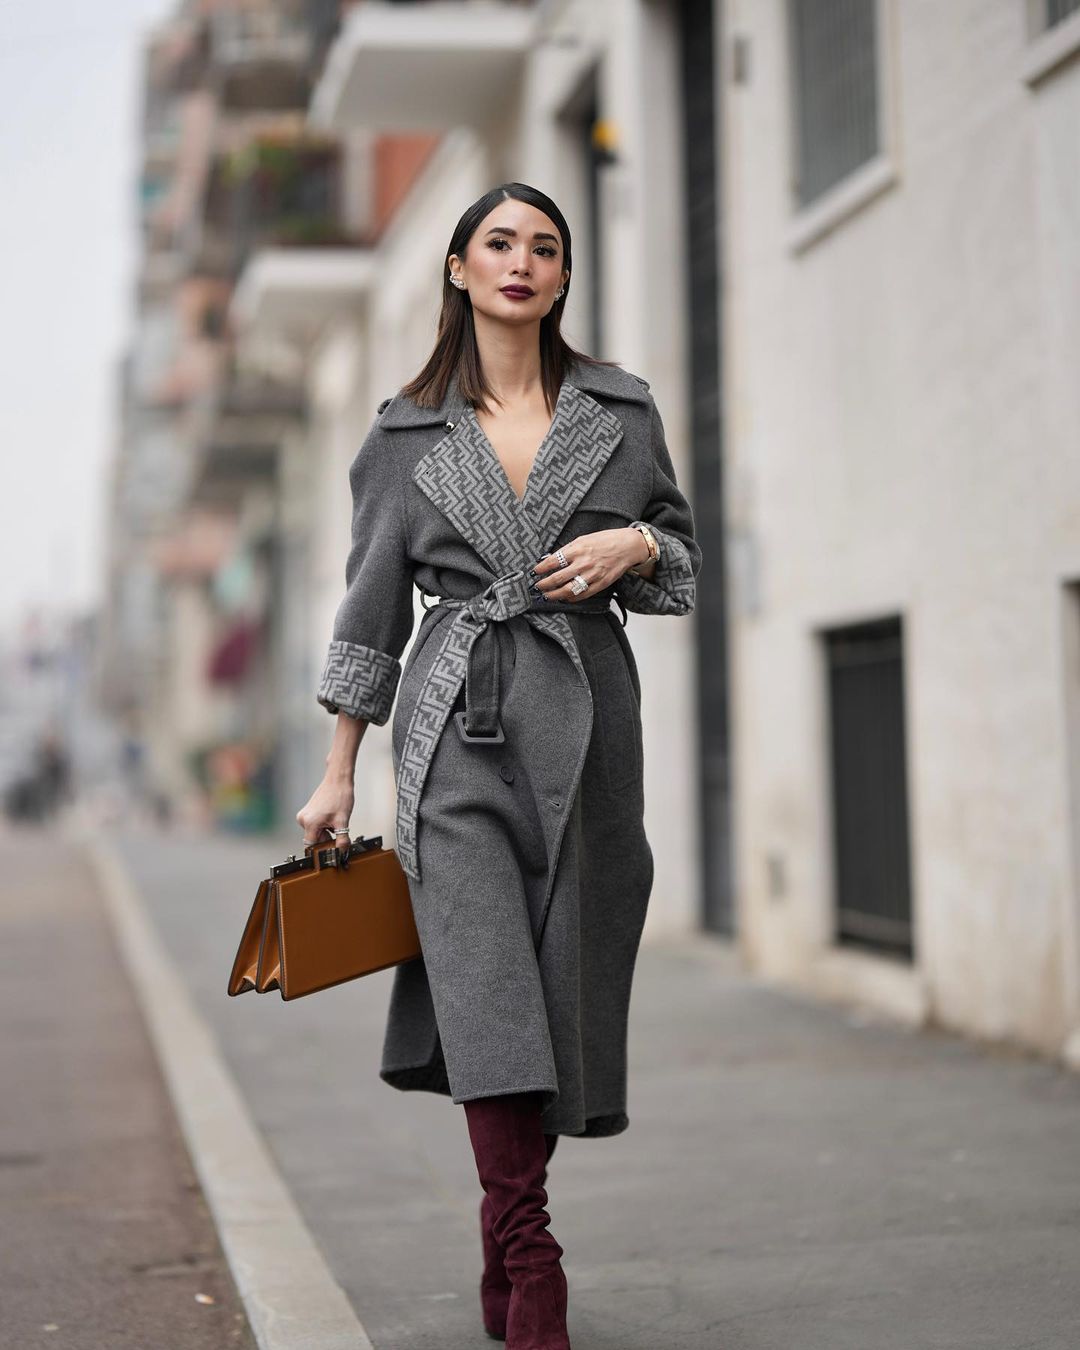 Heart Evangelista's Milan Fashion Week style is all about being